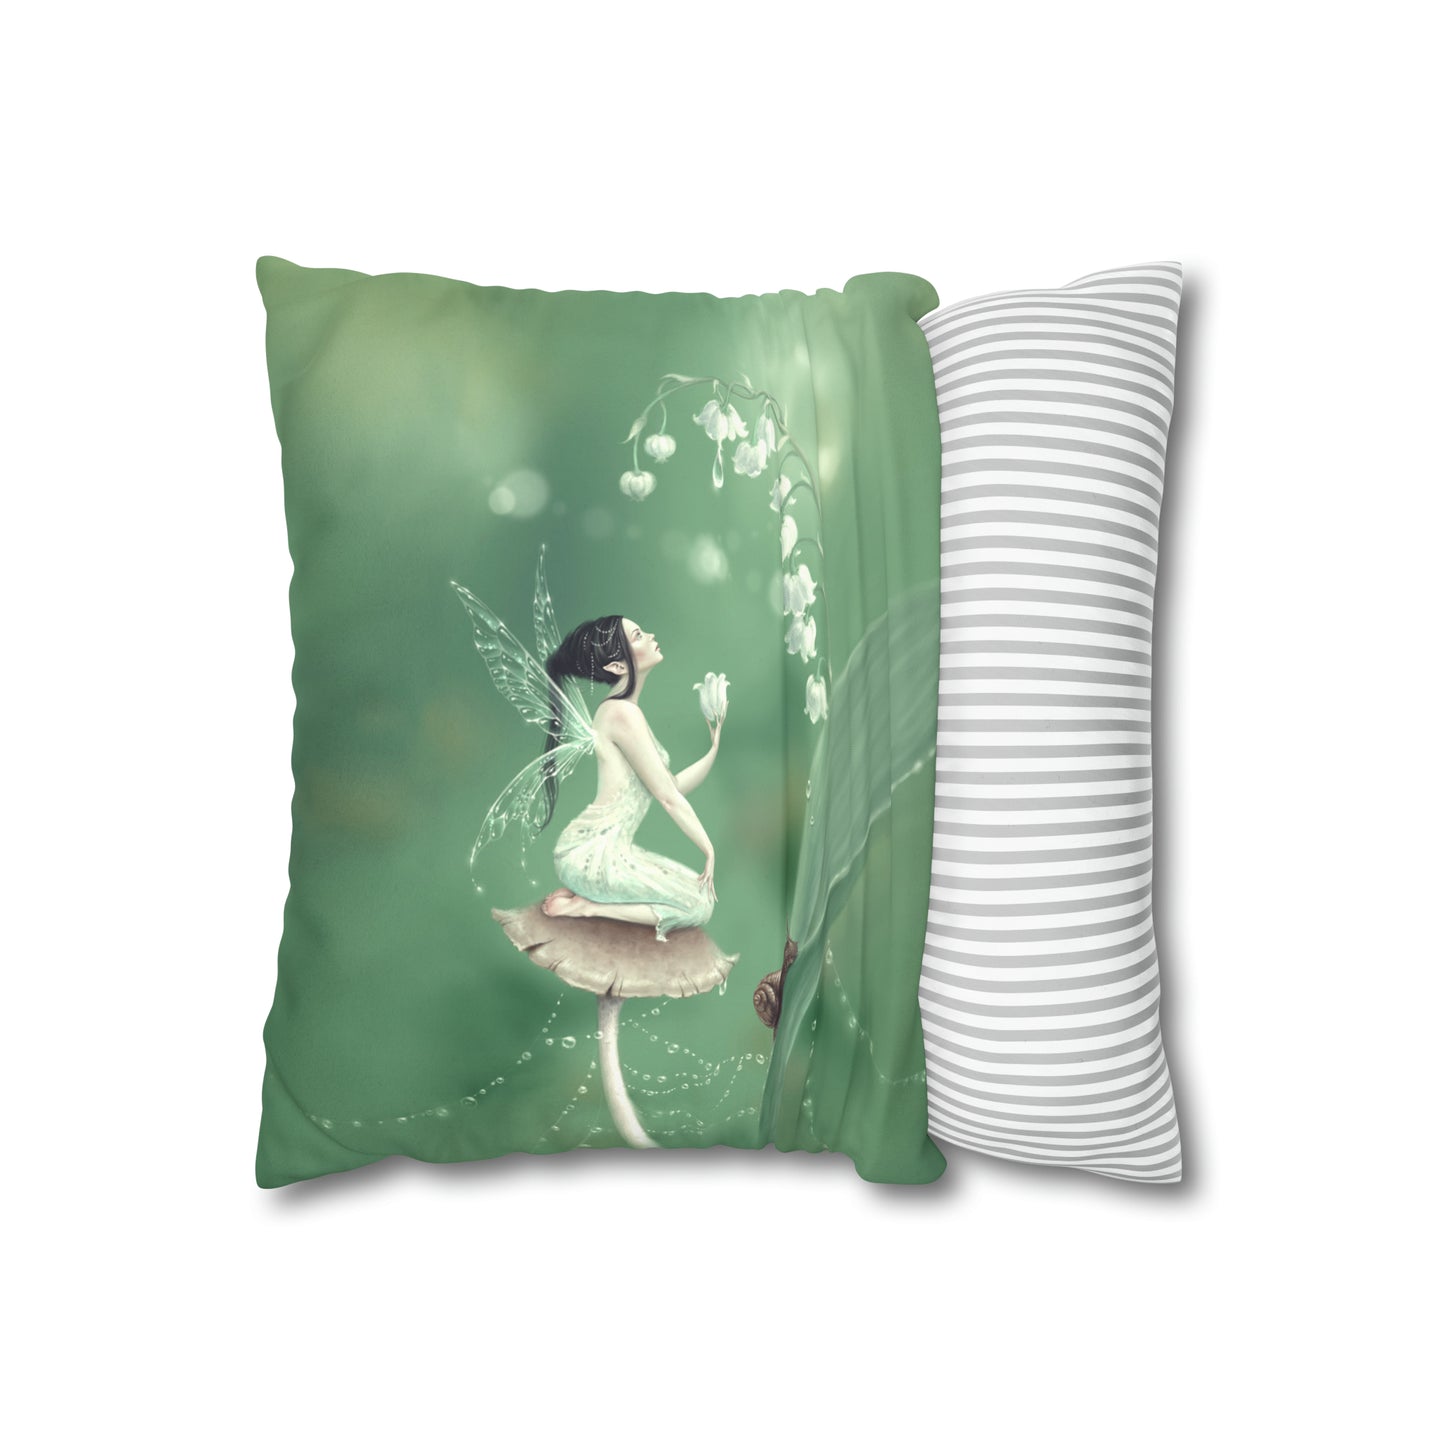 Throw Pillow Cover - Lily of the Valley